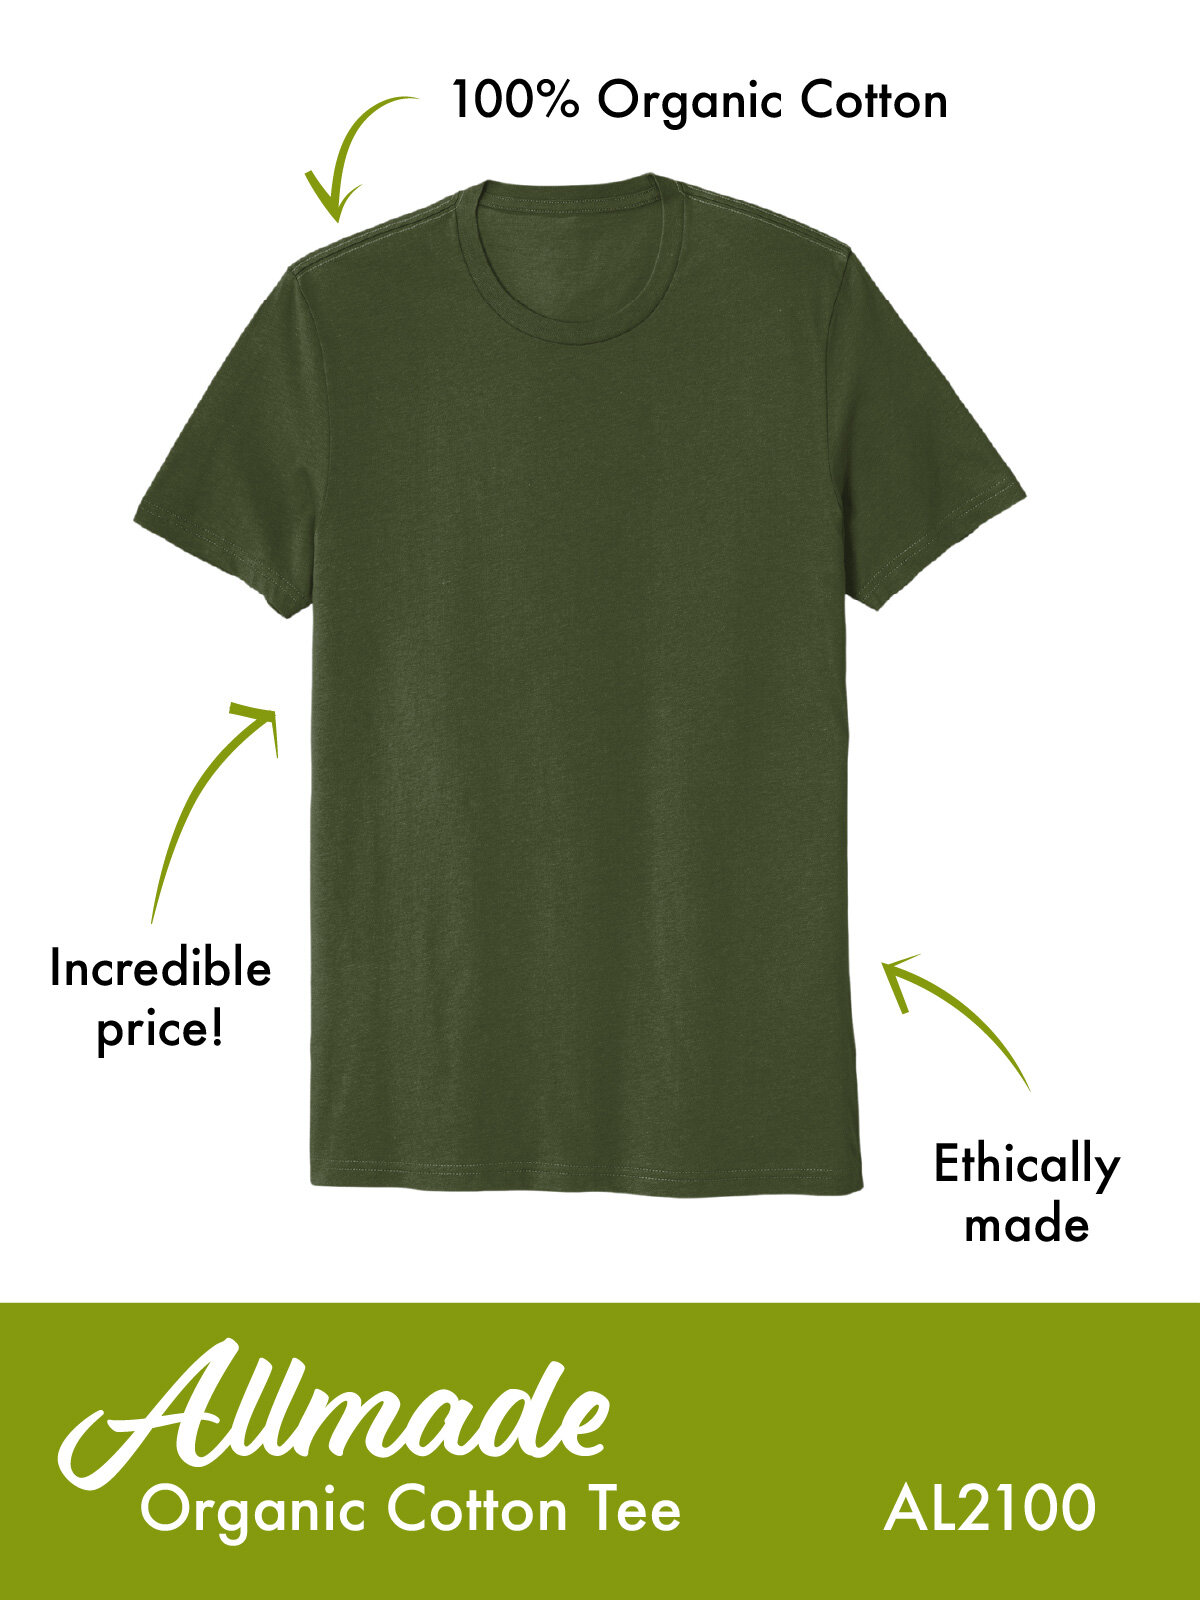 Sustainable — Printmade Apparel Co.